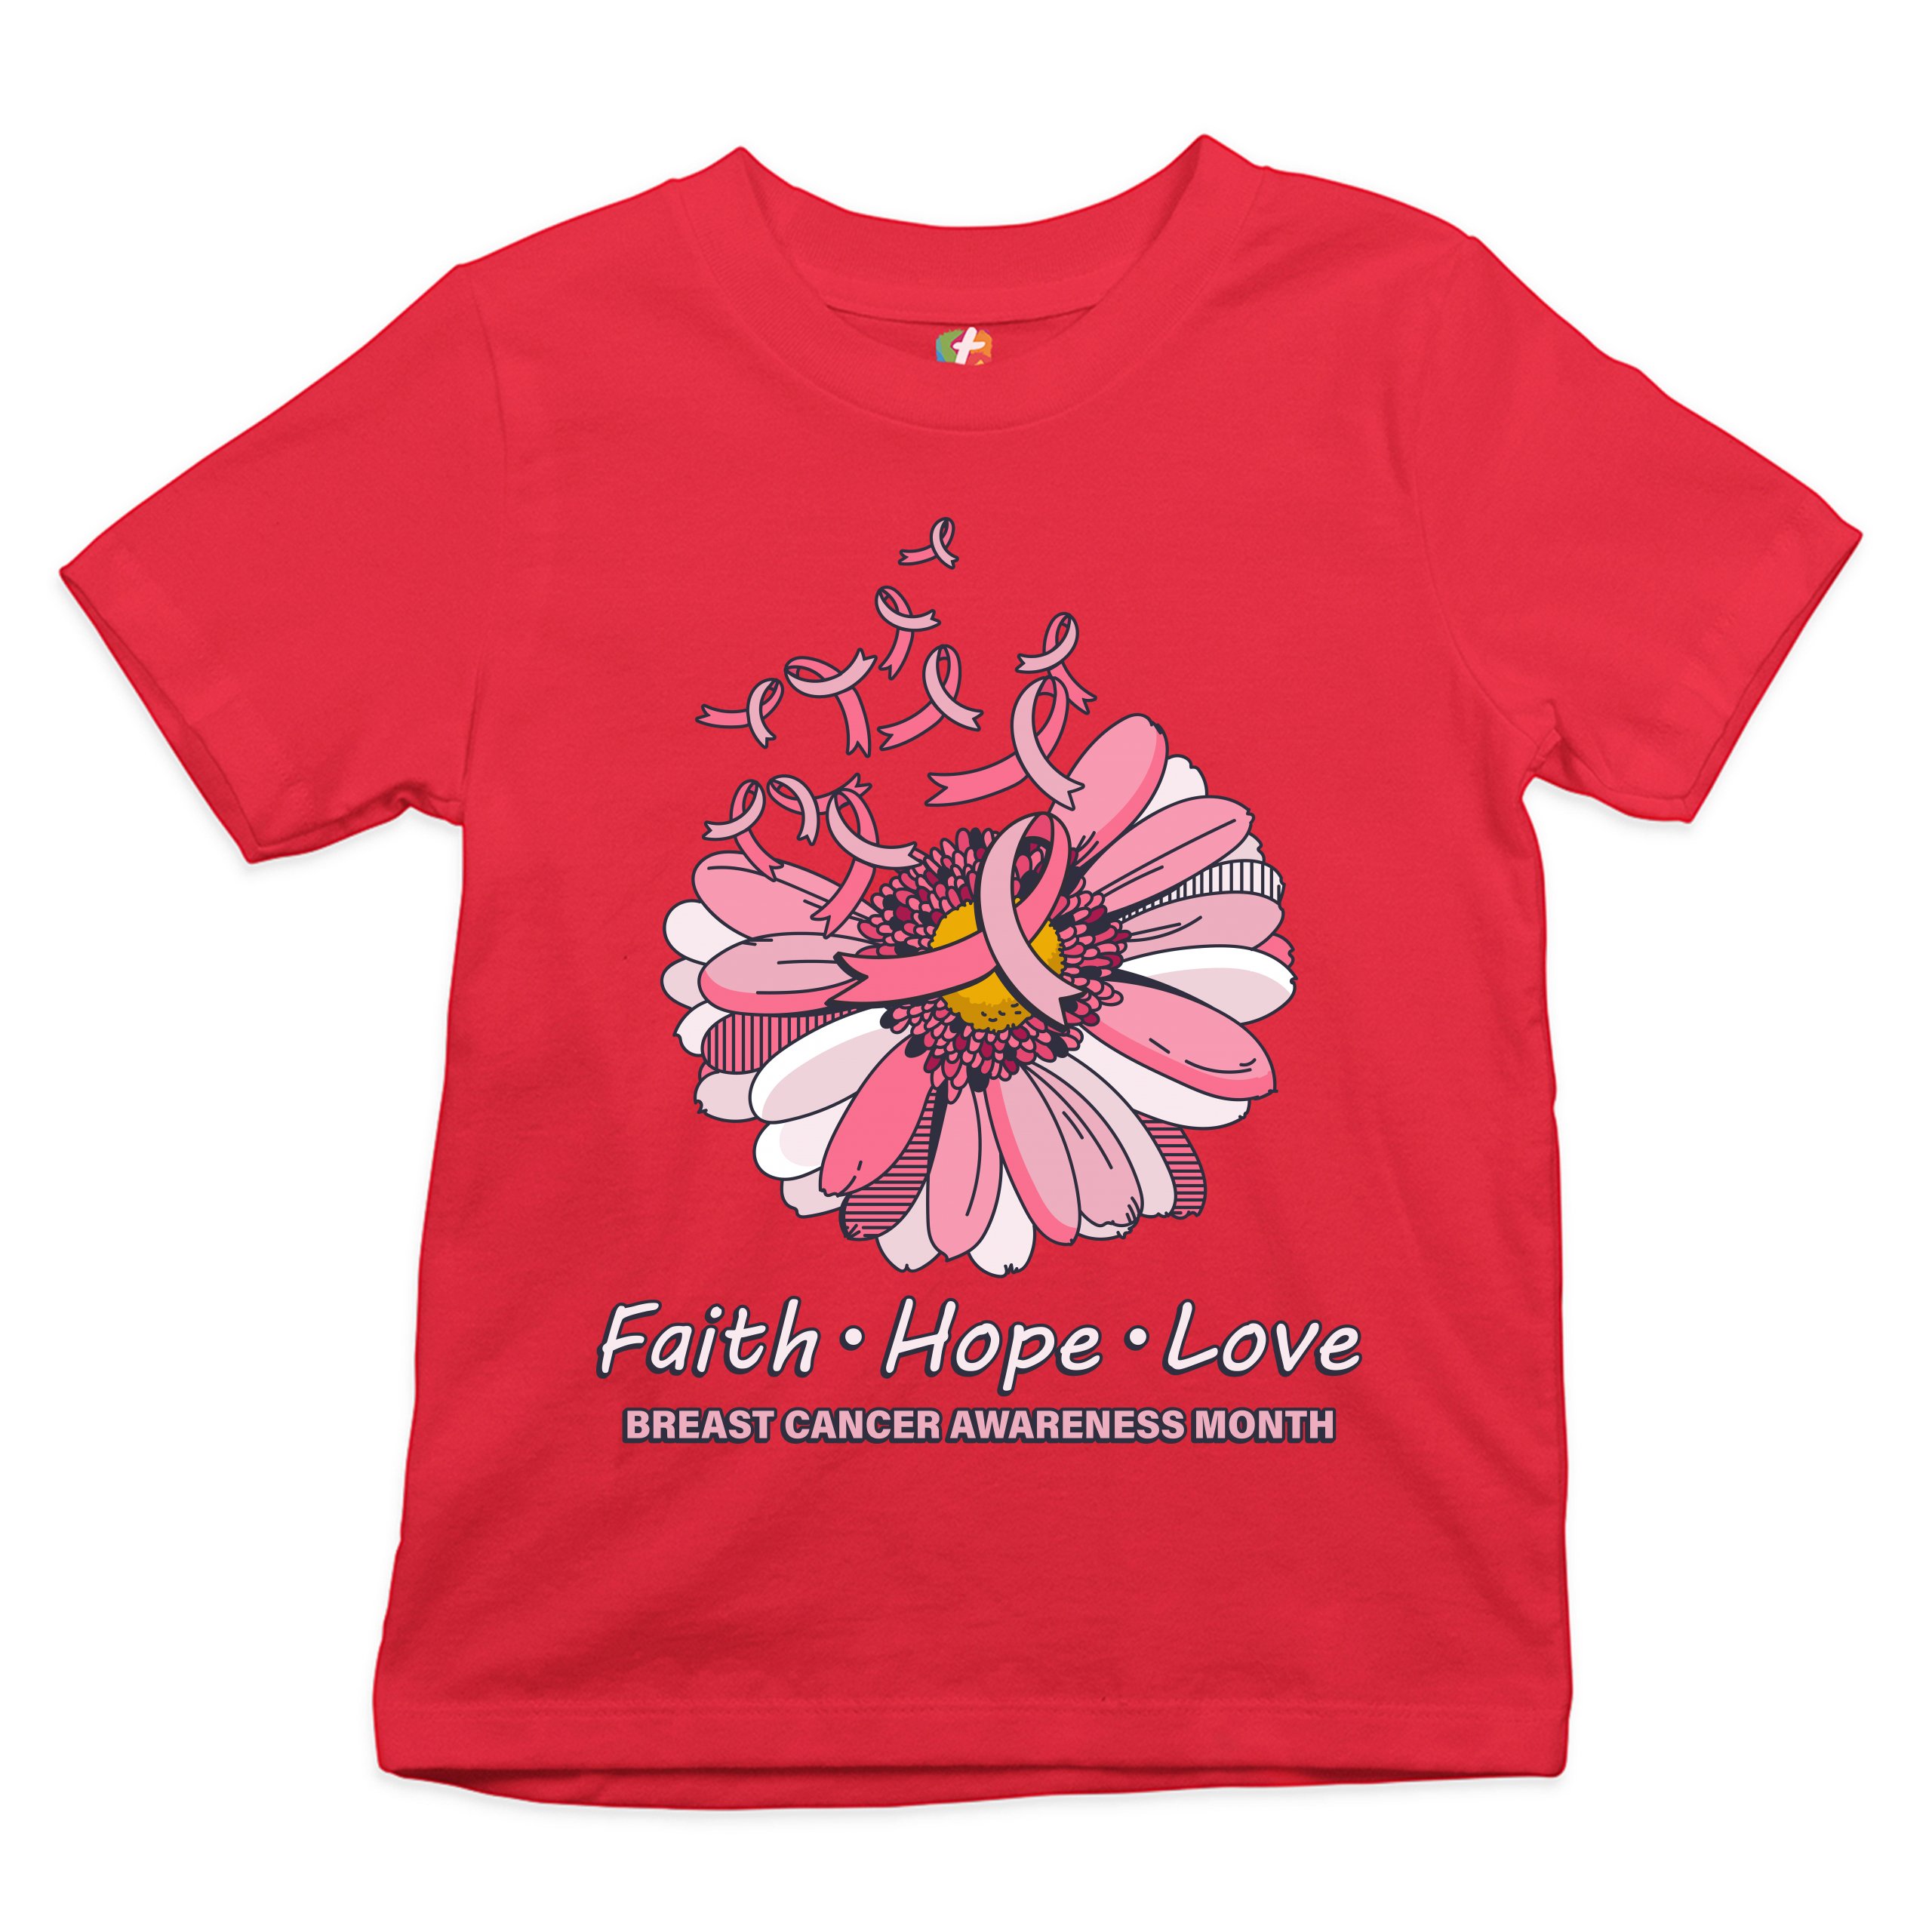 Tackle Breast Cancer Youth T-shirt Awareness Support Hope Belief Love Kids Shirt 